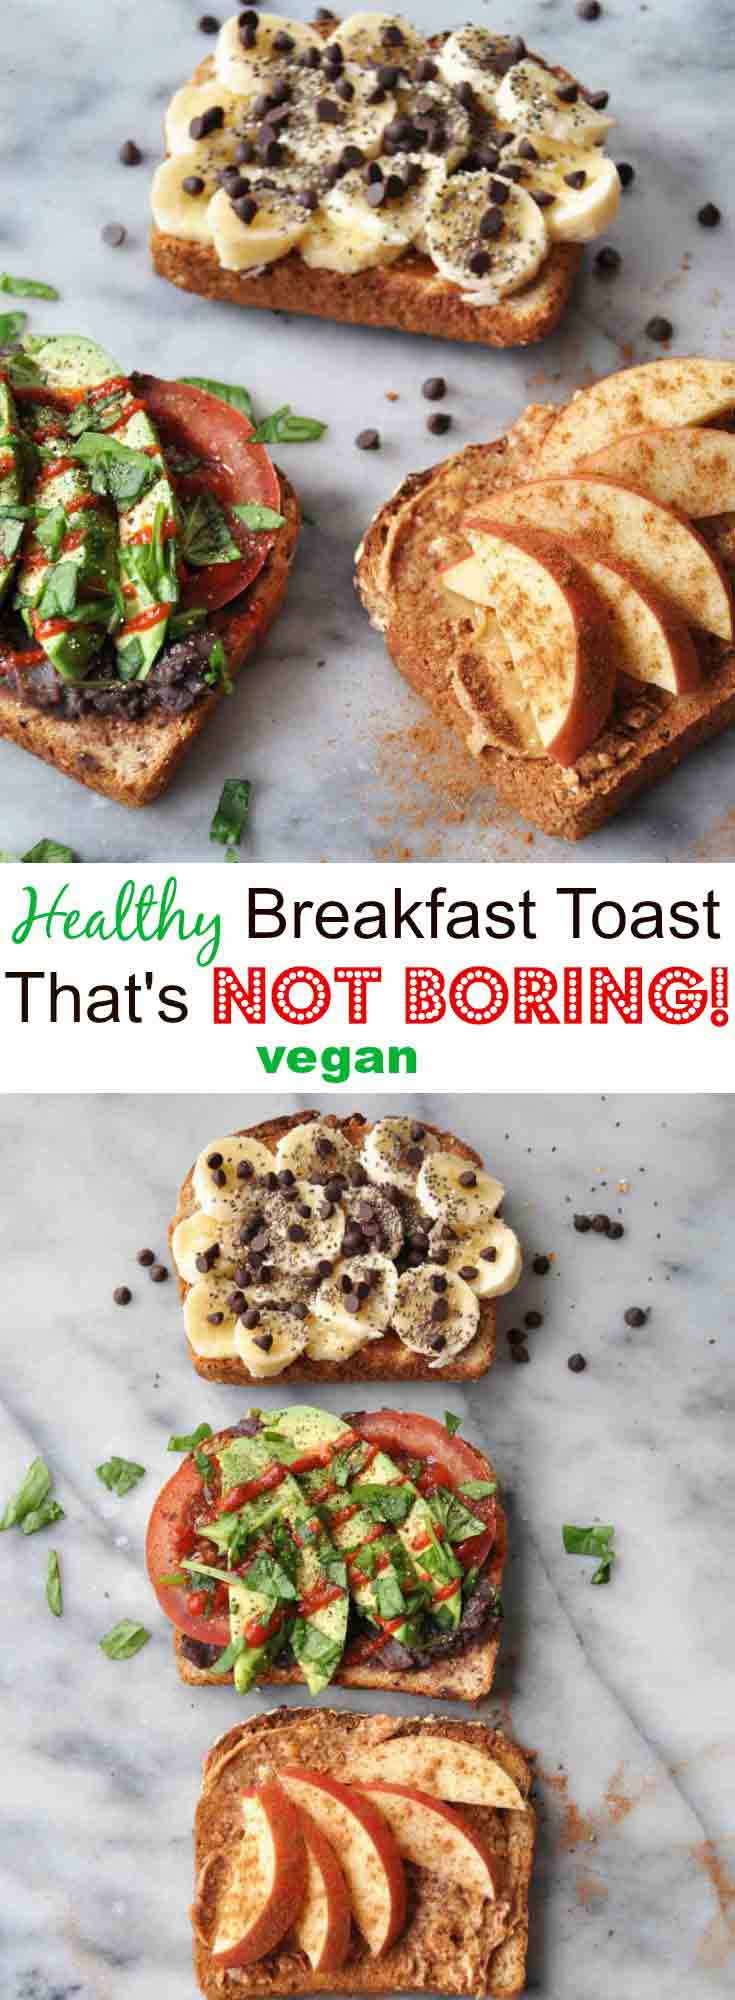 Simple, easy, healthy, and vegan toast that's delicious! Make it for breakfast, lunch, dinner, or a snack! www.veganosity.com